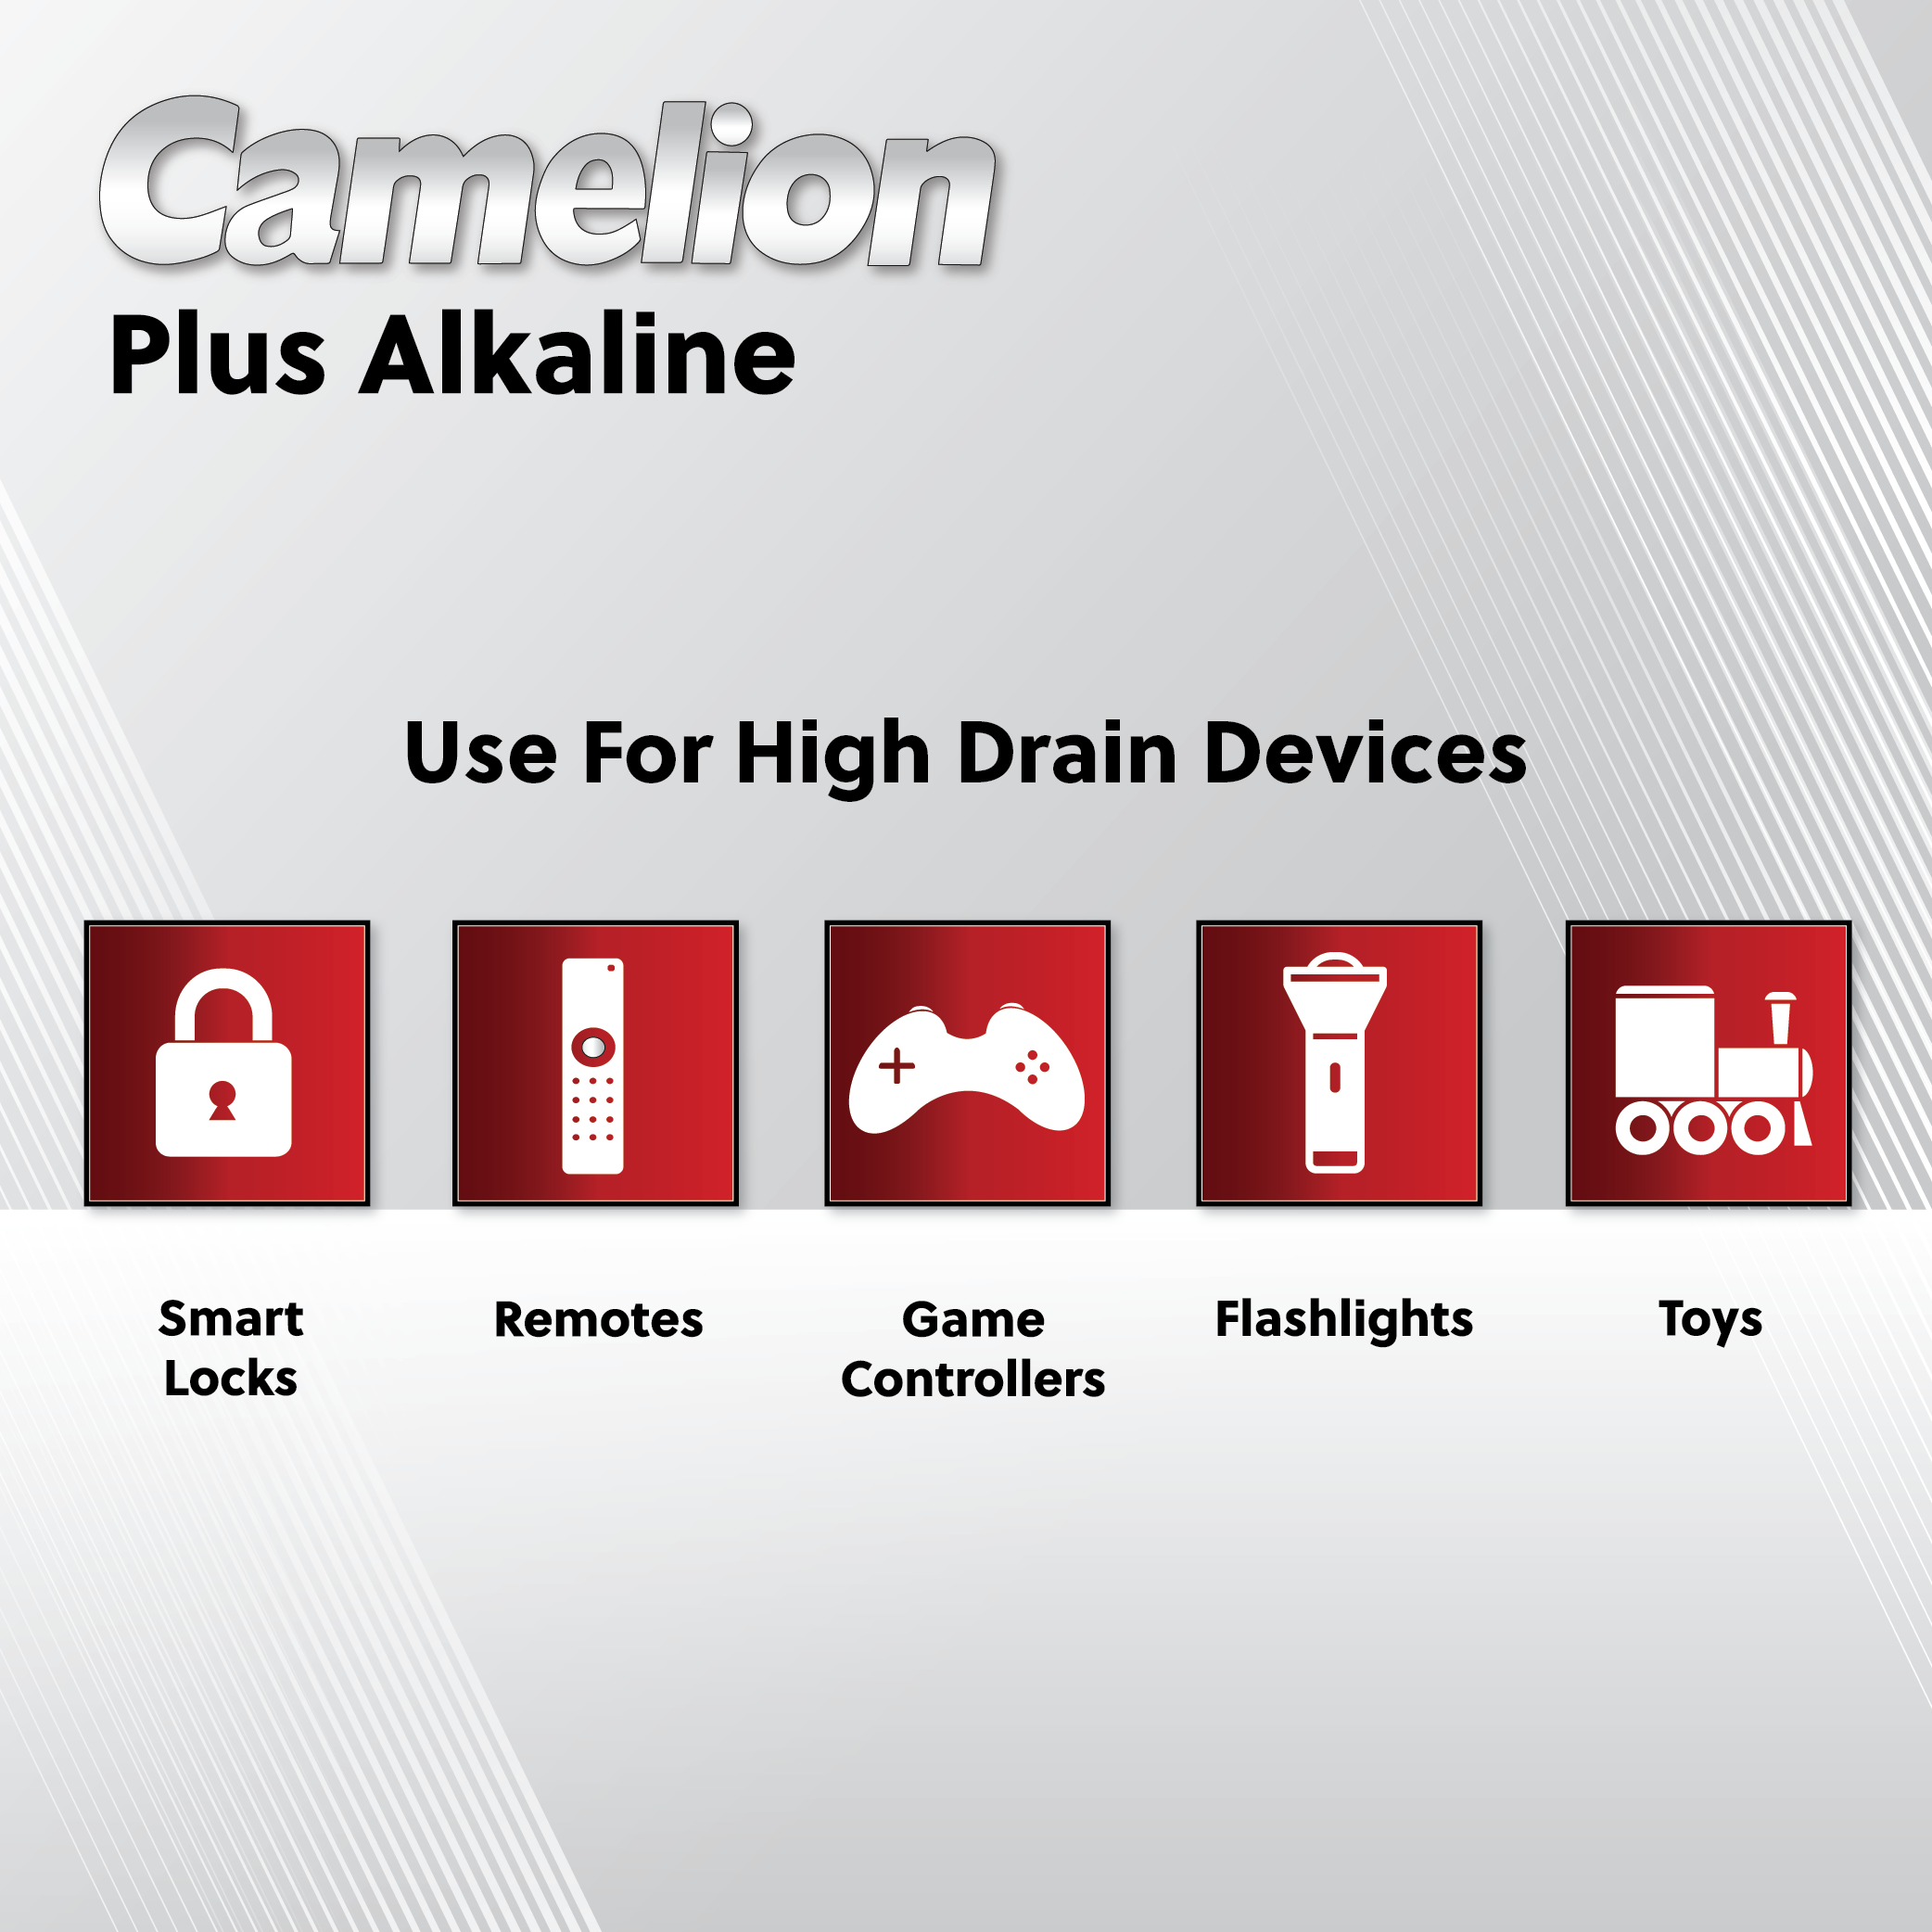 Camelion AA Alkaline Plus Blister Pack of 2